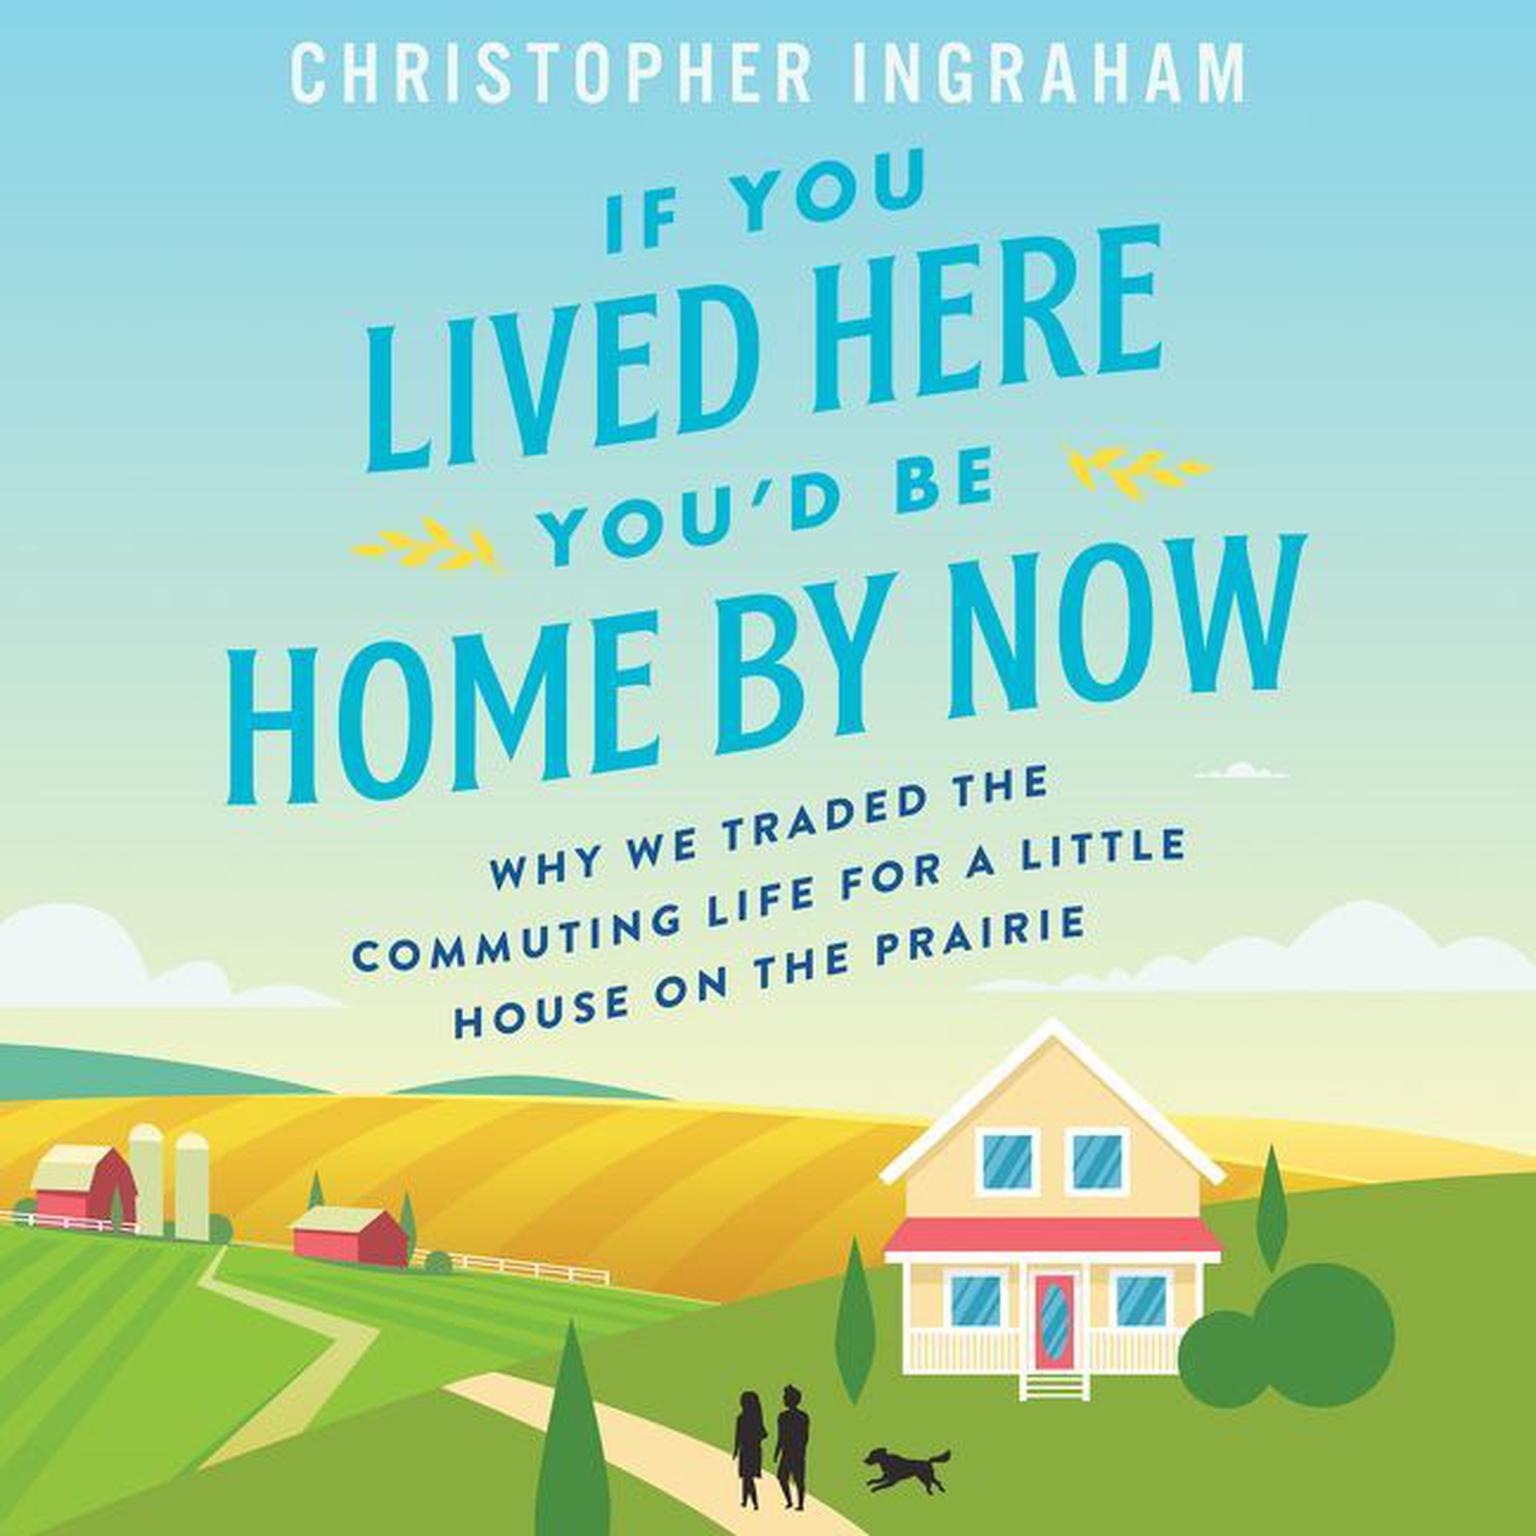 If You Lived Here Youd Be Home By Now: Why We Traded the Commuting Life for a Little House on the Prairie Audiobook, by Christopher Ingraham